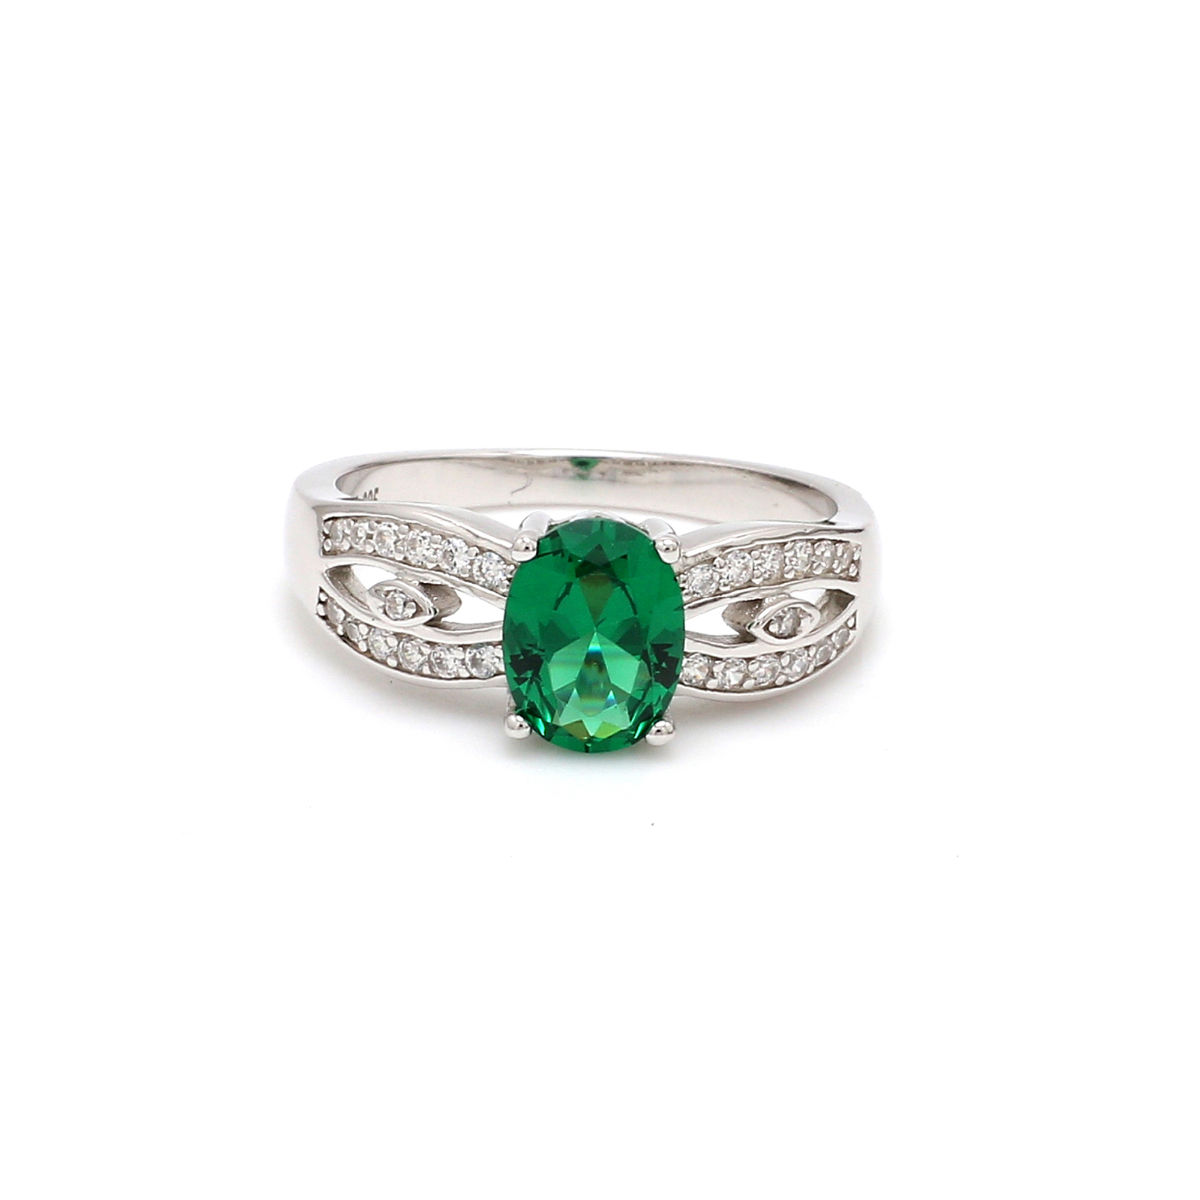 Oval Green Emerald Ring With Baguette Diamond Accent Engagement Setting